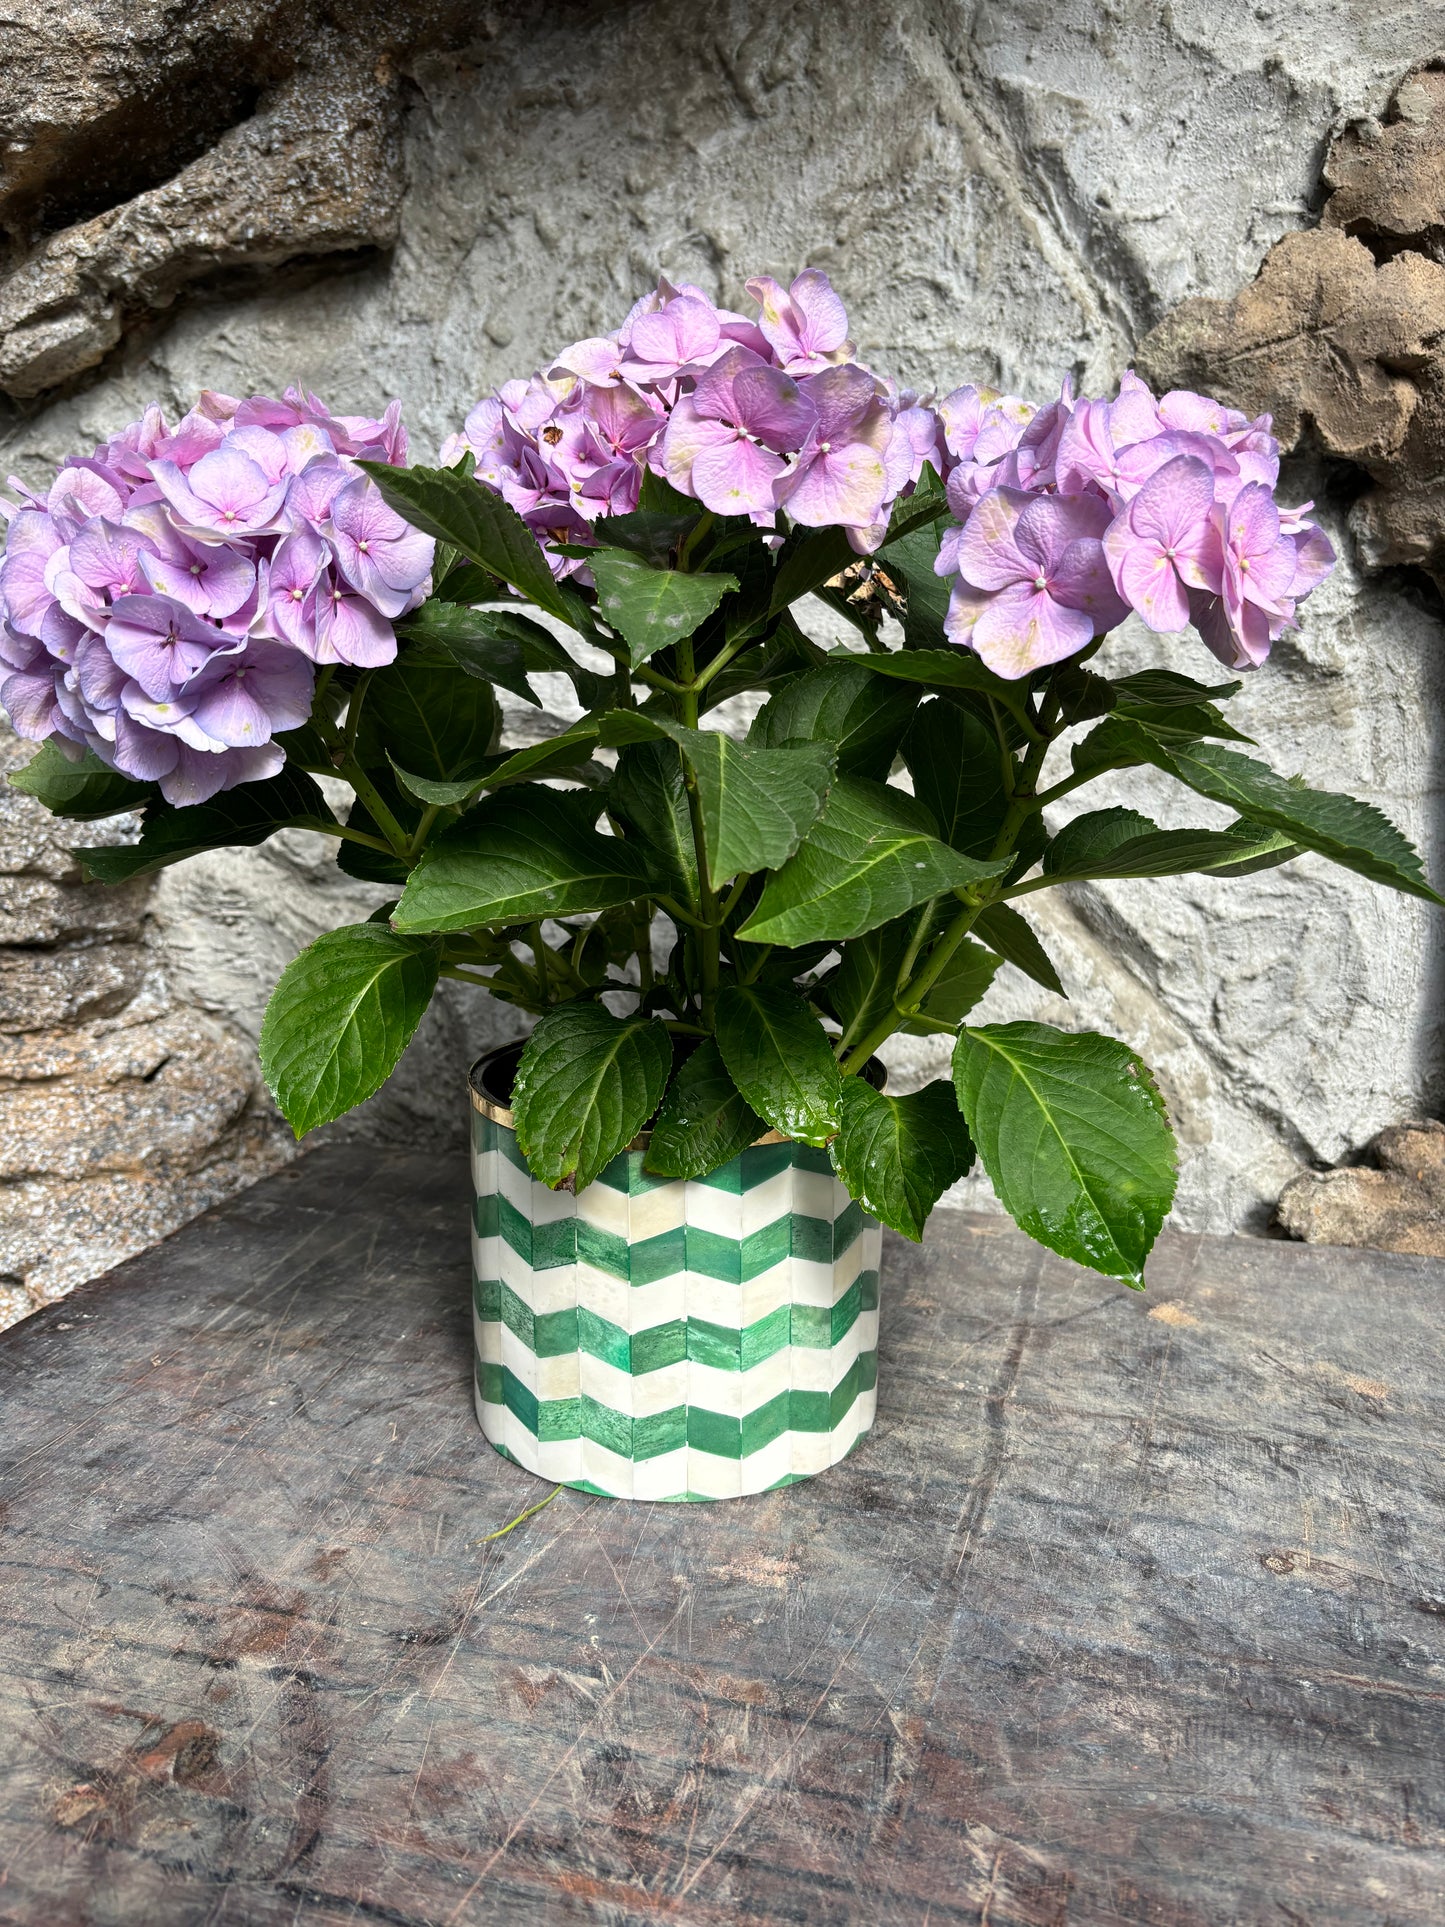 A green and white bone inlay planter with a purple hydrangea outside on a wooden table.